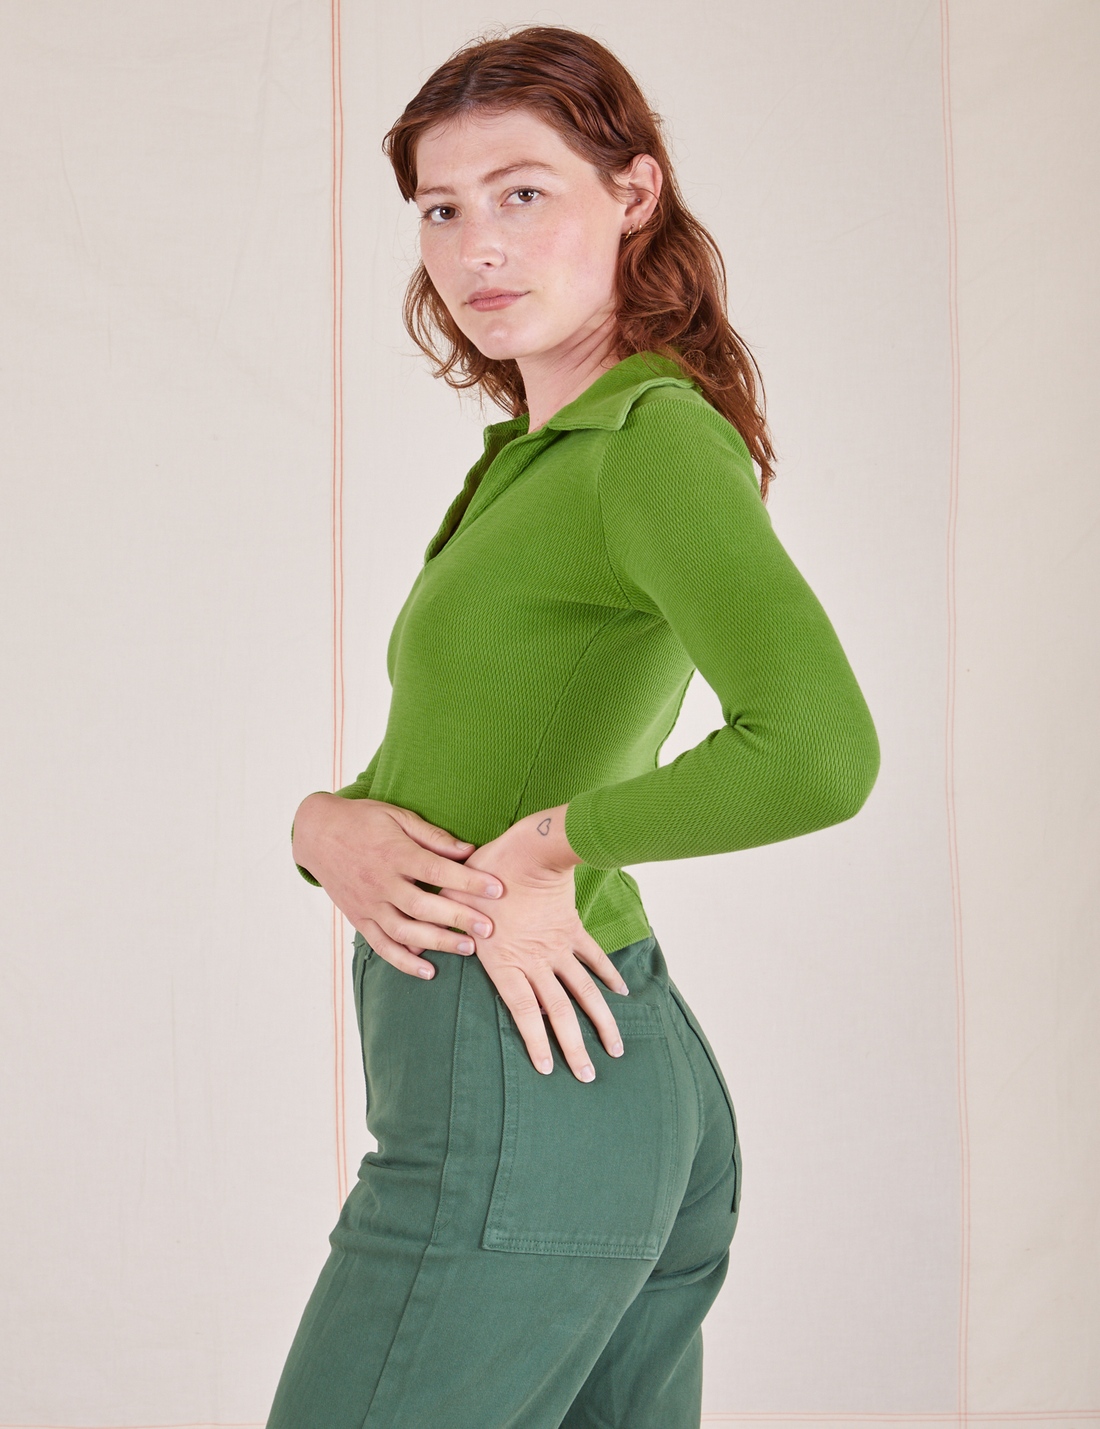 Long Sleeve Fisherman Polo in Bright Olive side view on Alex wearing dark emerald green Western Pants